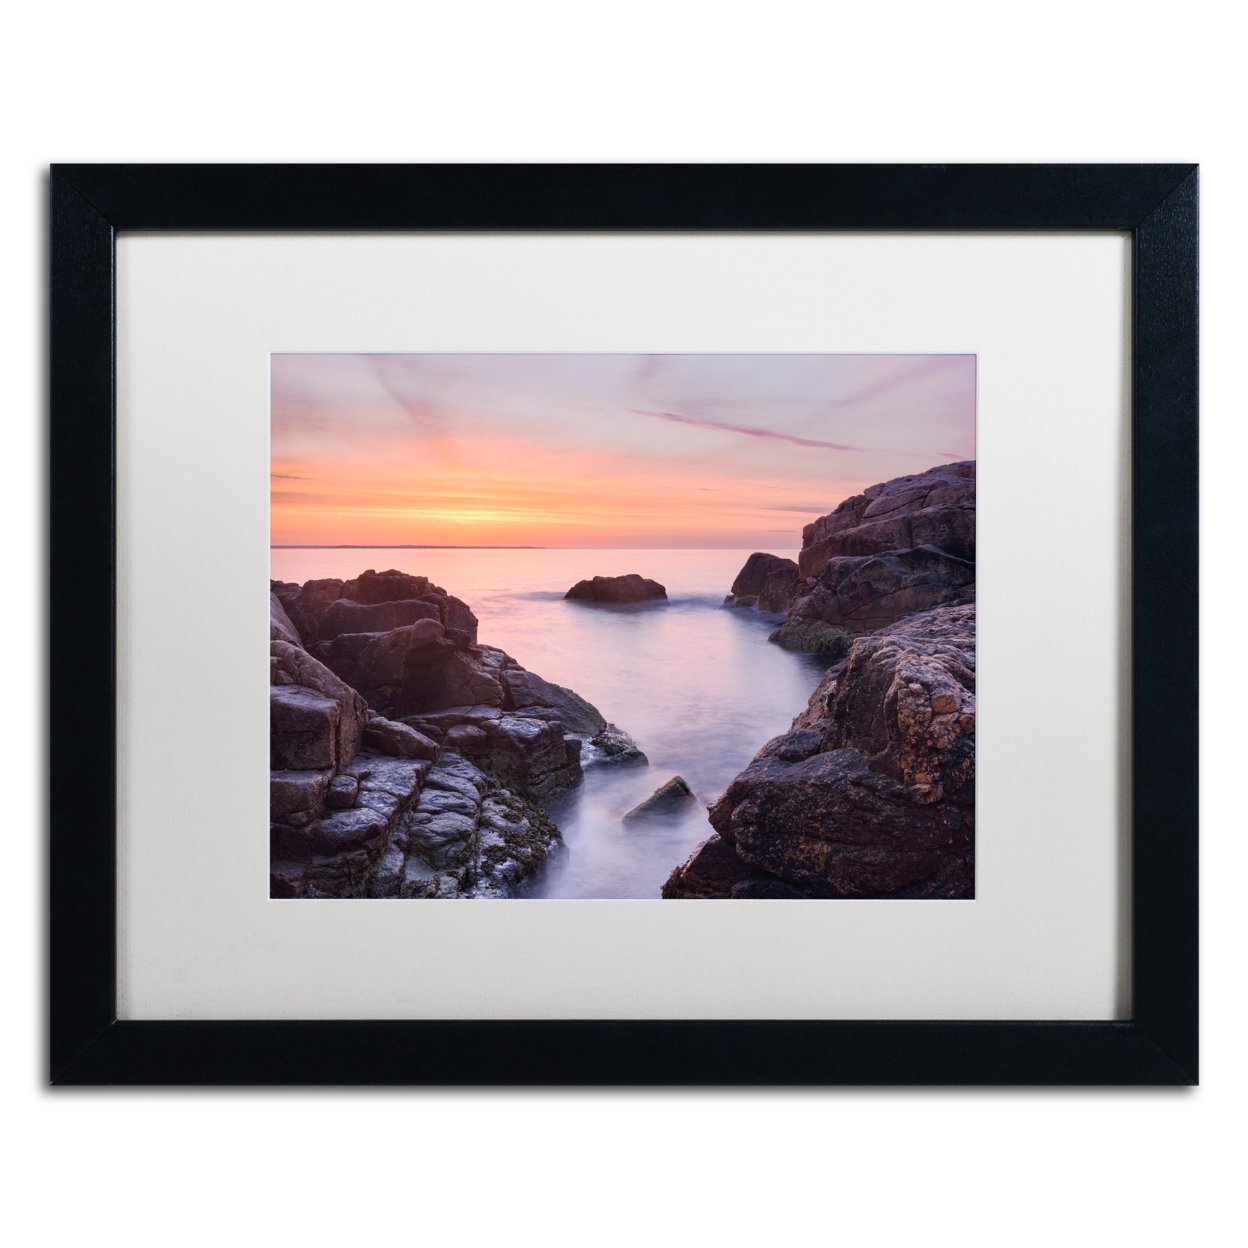 Michael Blanchette Photography 'Between Rocks' Black Wooden Framed Art 18 X 22 Inches